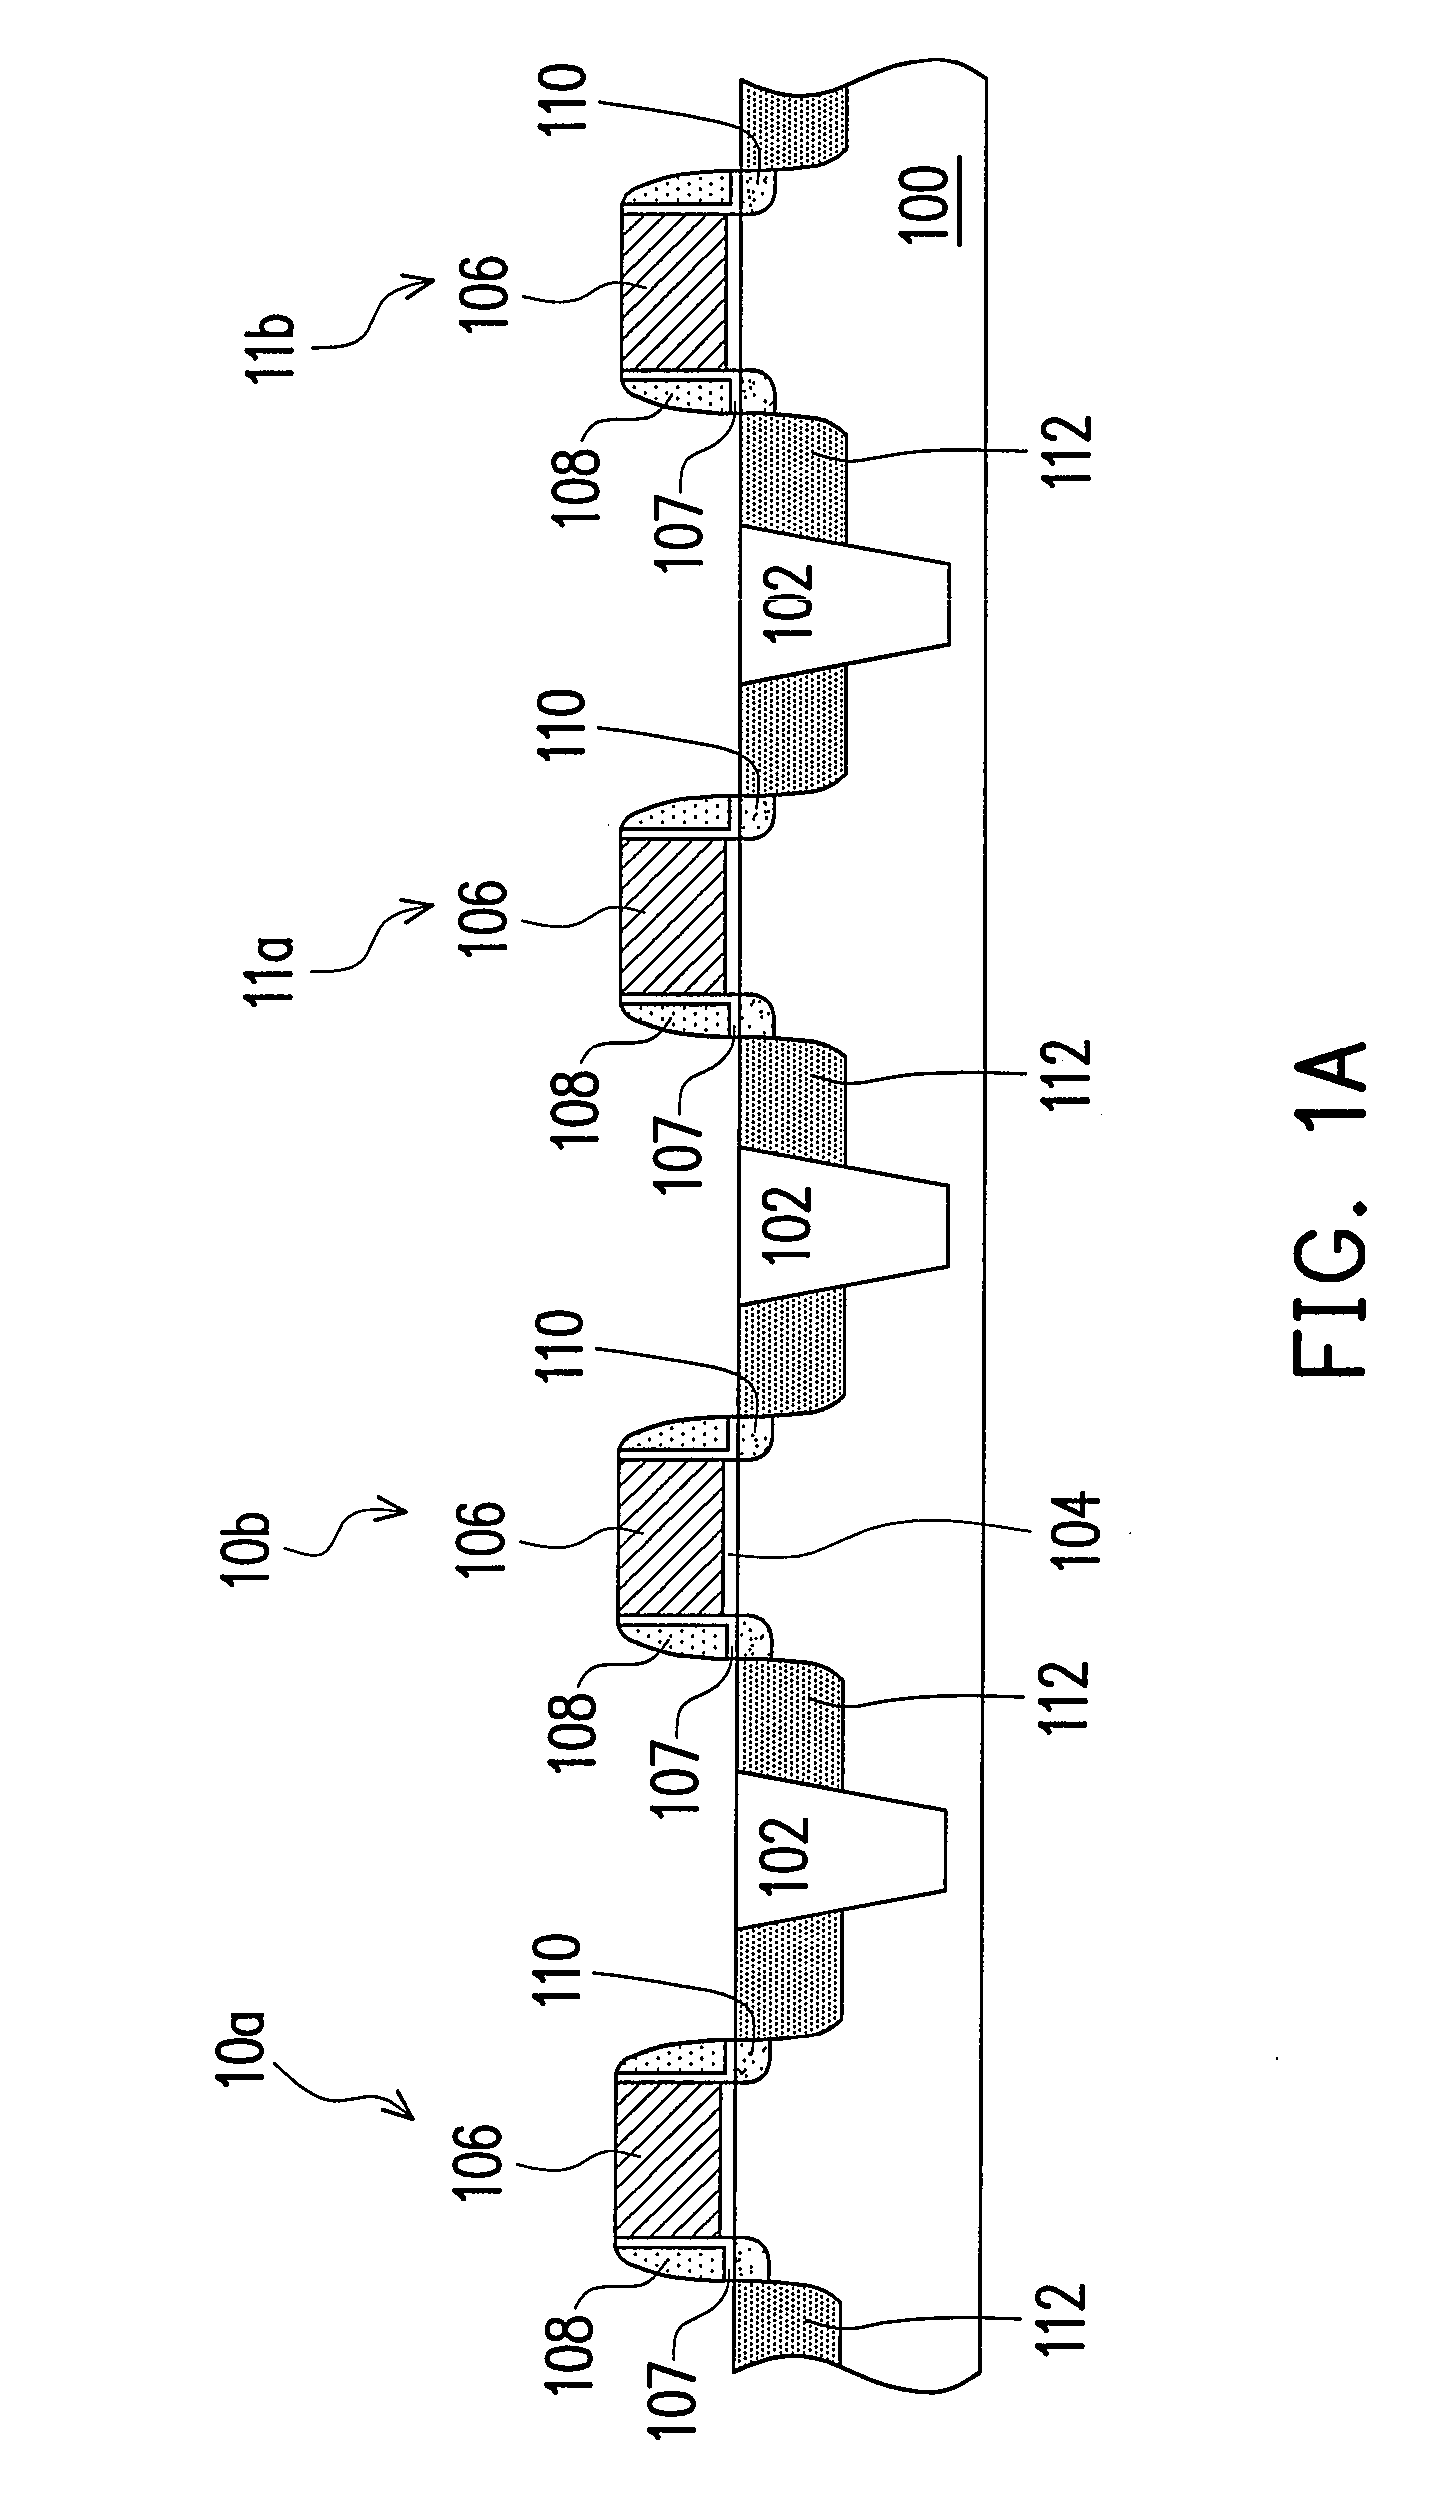 Semiconductor device and method of fabricating thereof